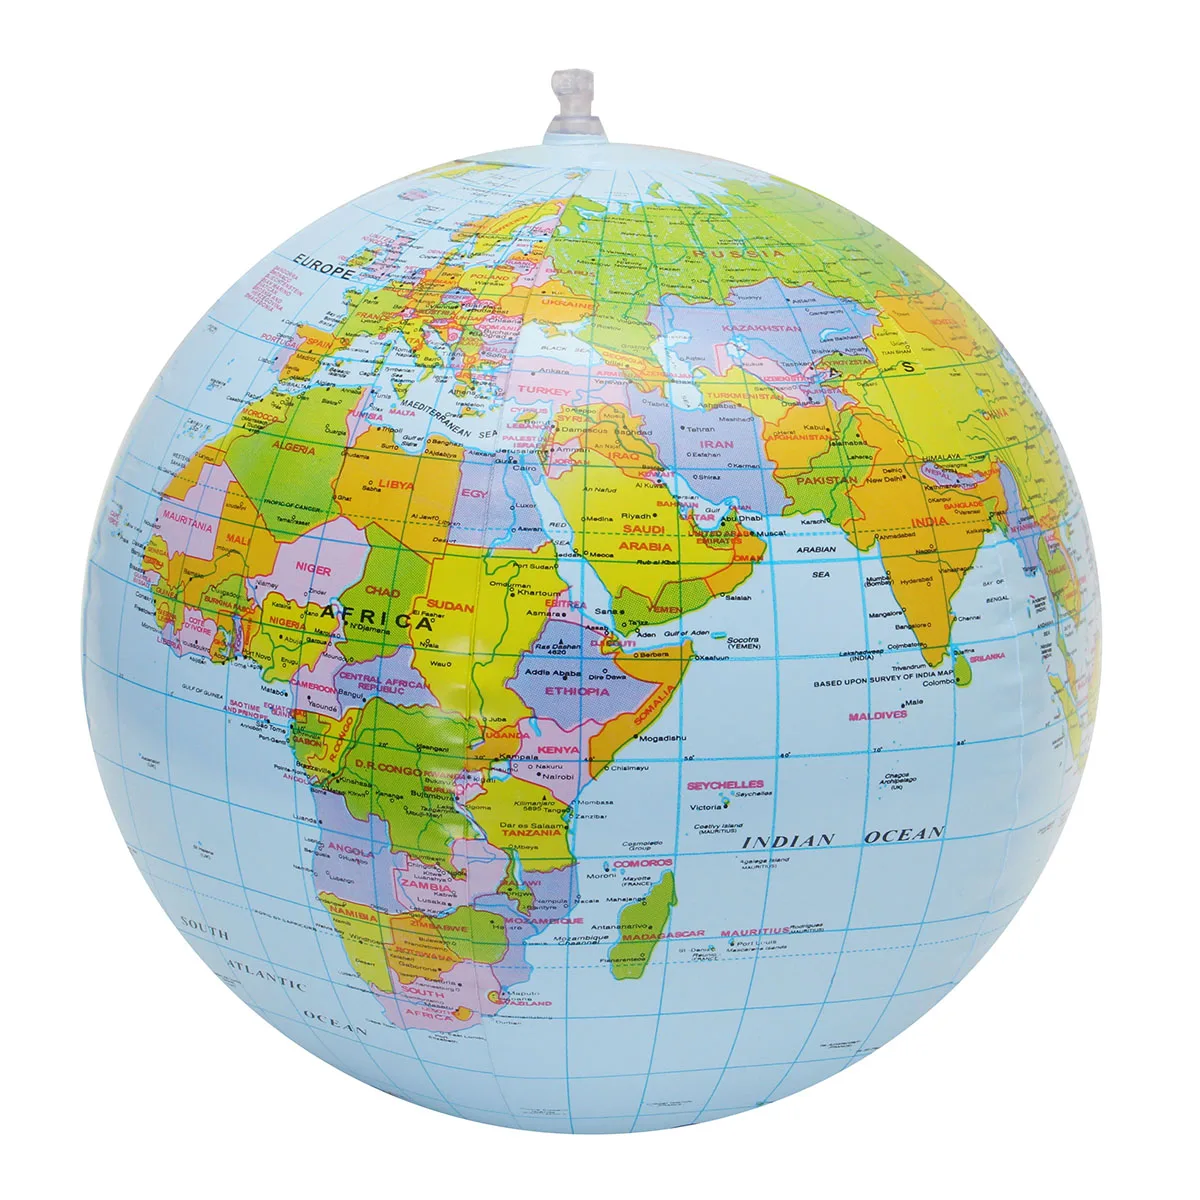 

1 Pcs Inflatable Globe World Earth Ocean Map Ball 30cm Geography Learning Educational Beach Ball Kids Toy home Office Decoration